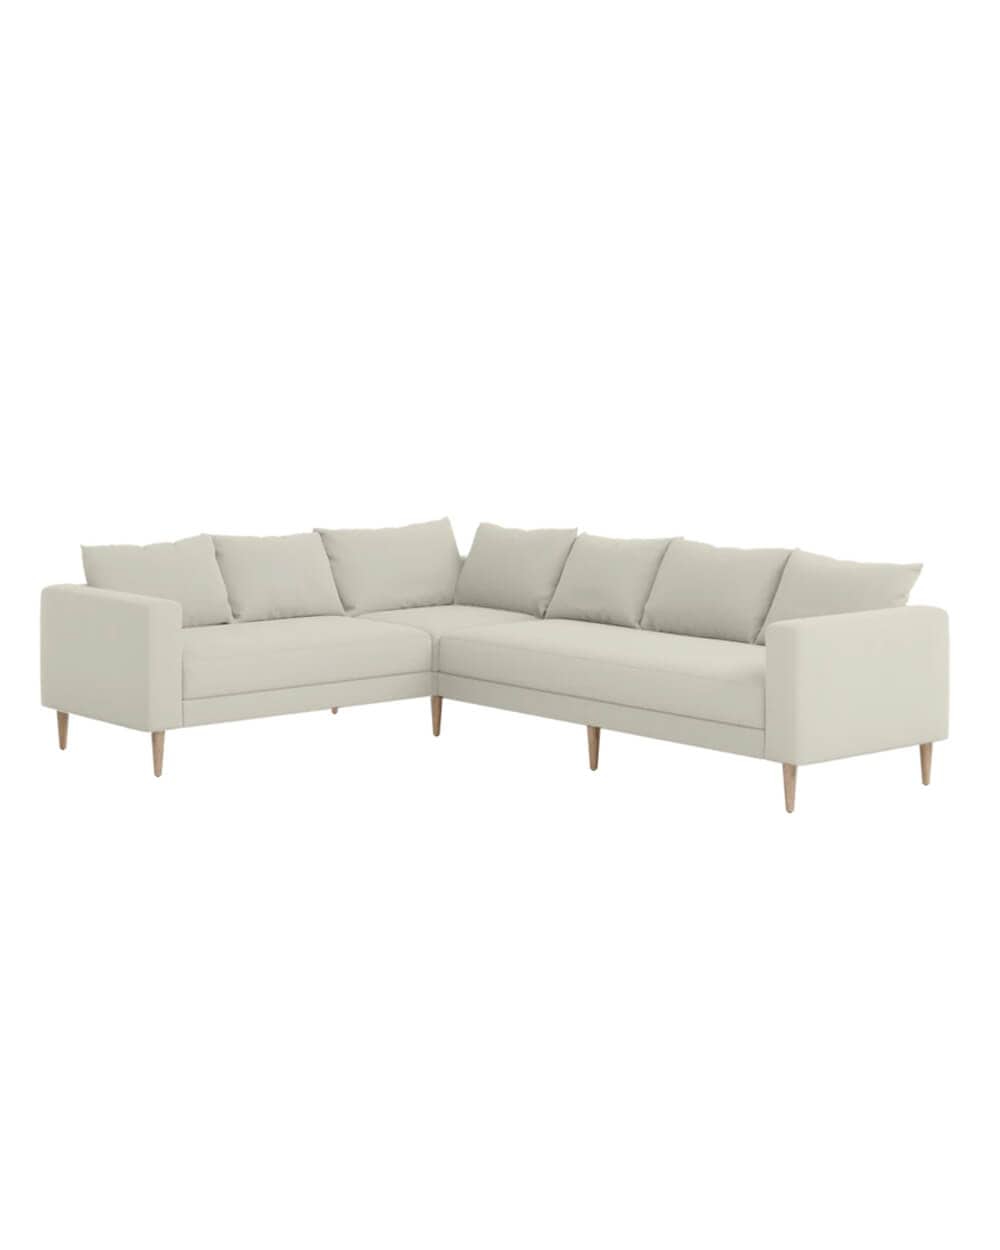 The Essential Corner Sectional (6 Seat)